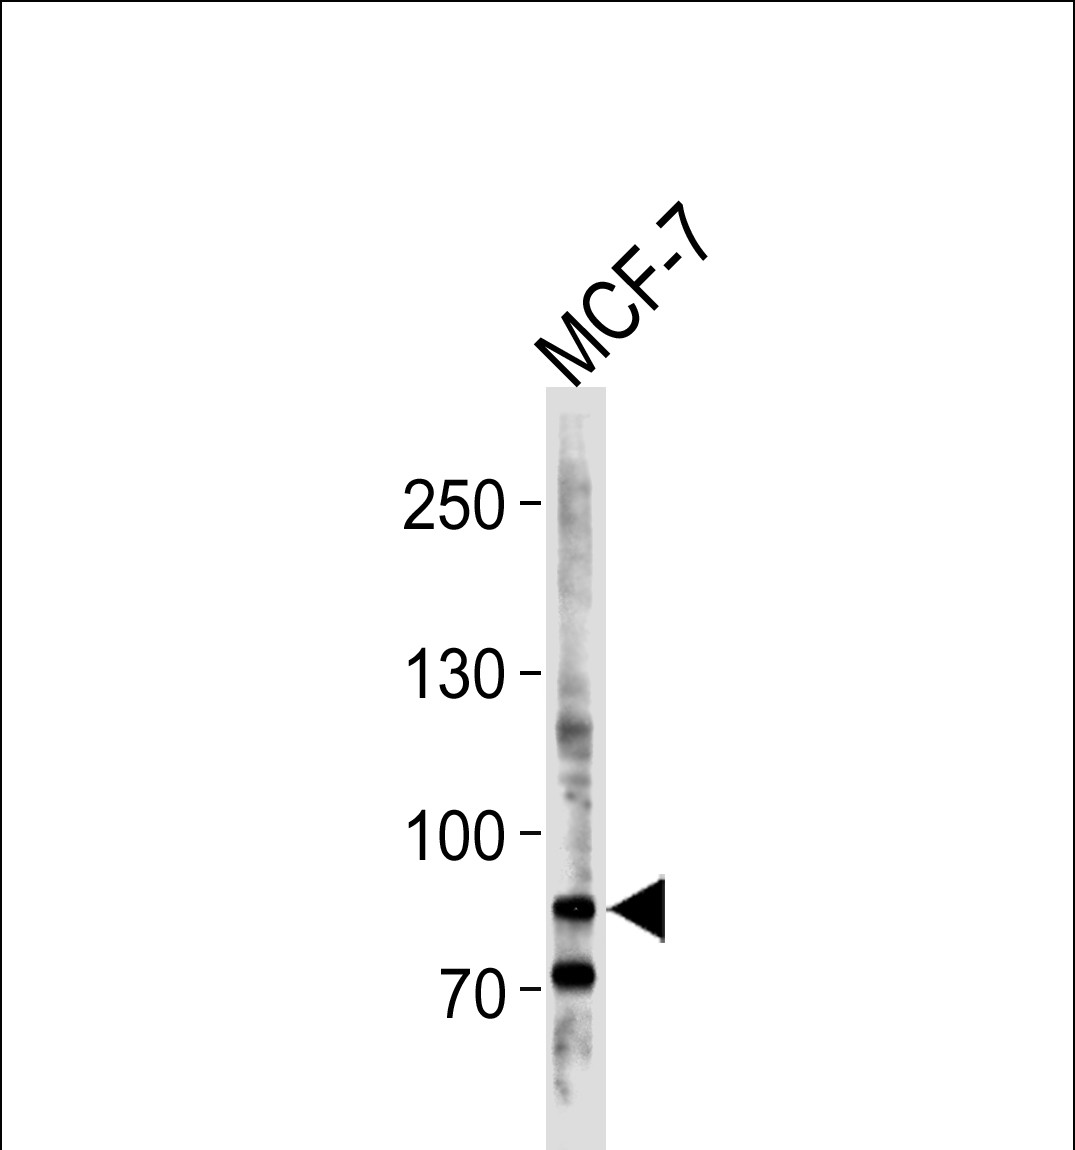 Western blot analysis of lysate from MCF-7 cell line, using BCAS3 Antibody (C-term)(Cat. #AP1437b). AP1437b was diluted at 1:1000 at each lane. A goat anti-rabbit IgG H&L(HRP) at 1:5000 dilution was used as the secondary antibody. Lysate at 35ug per lane. 